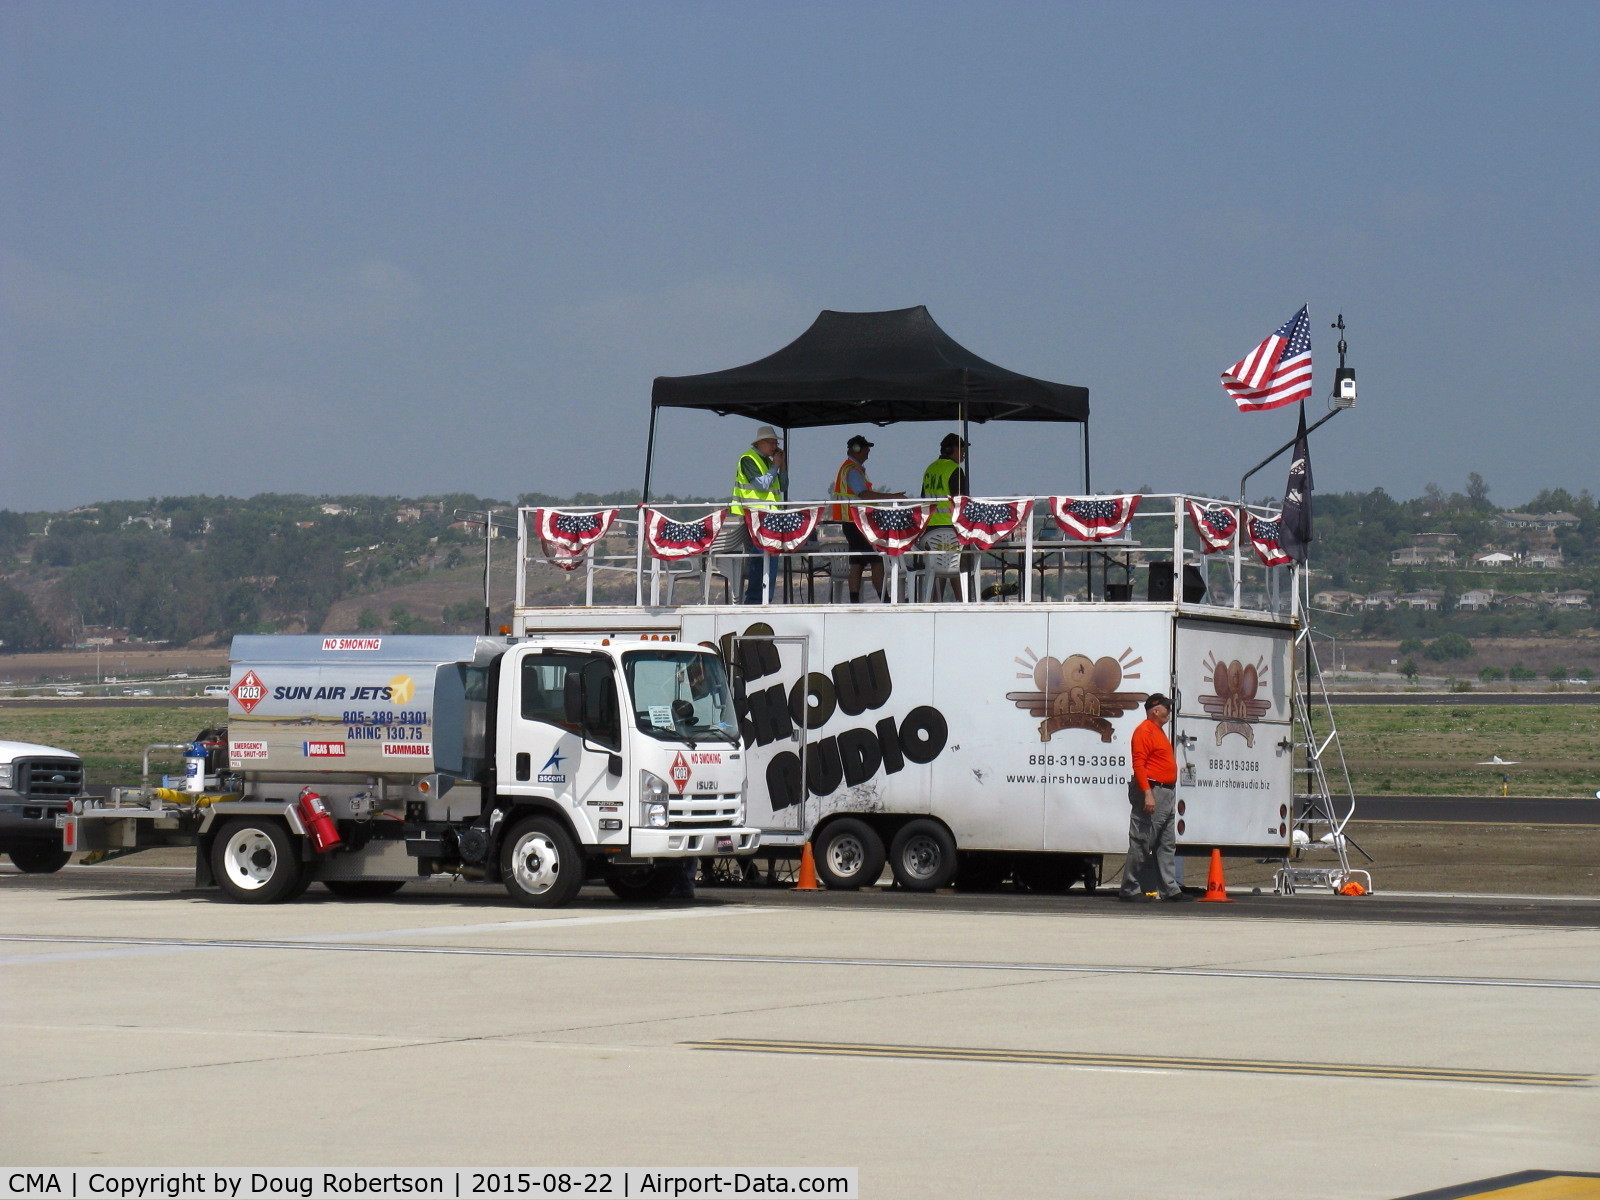 Camarillo Airport (CMA) - AIRSHOW CENTRAL-Announcers and Public Address System for Wings Over Camarillo 2015 Airshow, (SunAir Jets Fuel Truck does NOT directly power the booth!), lol